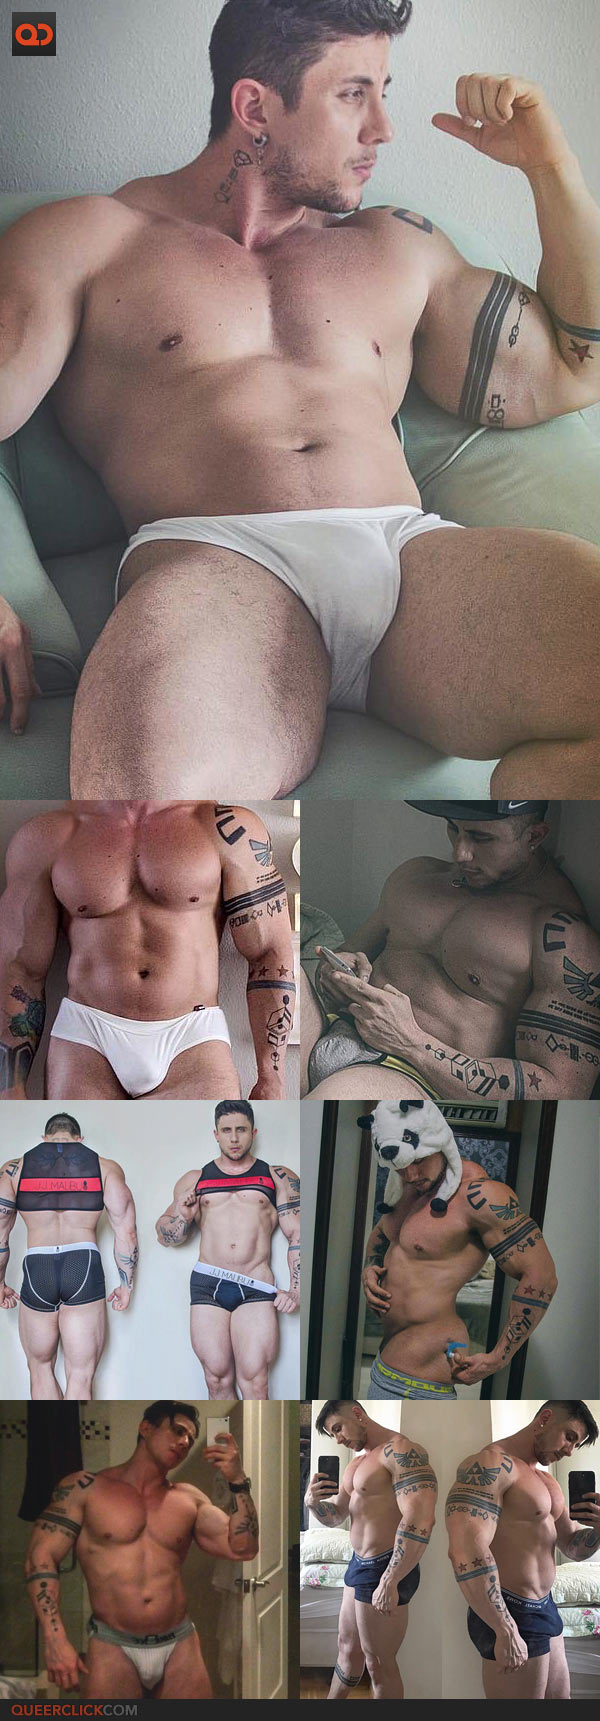 Ten Bulges From Instagram You Need In Your Life This Week!